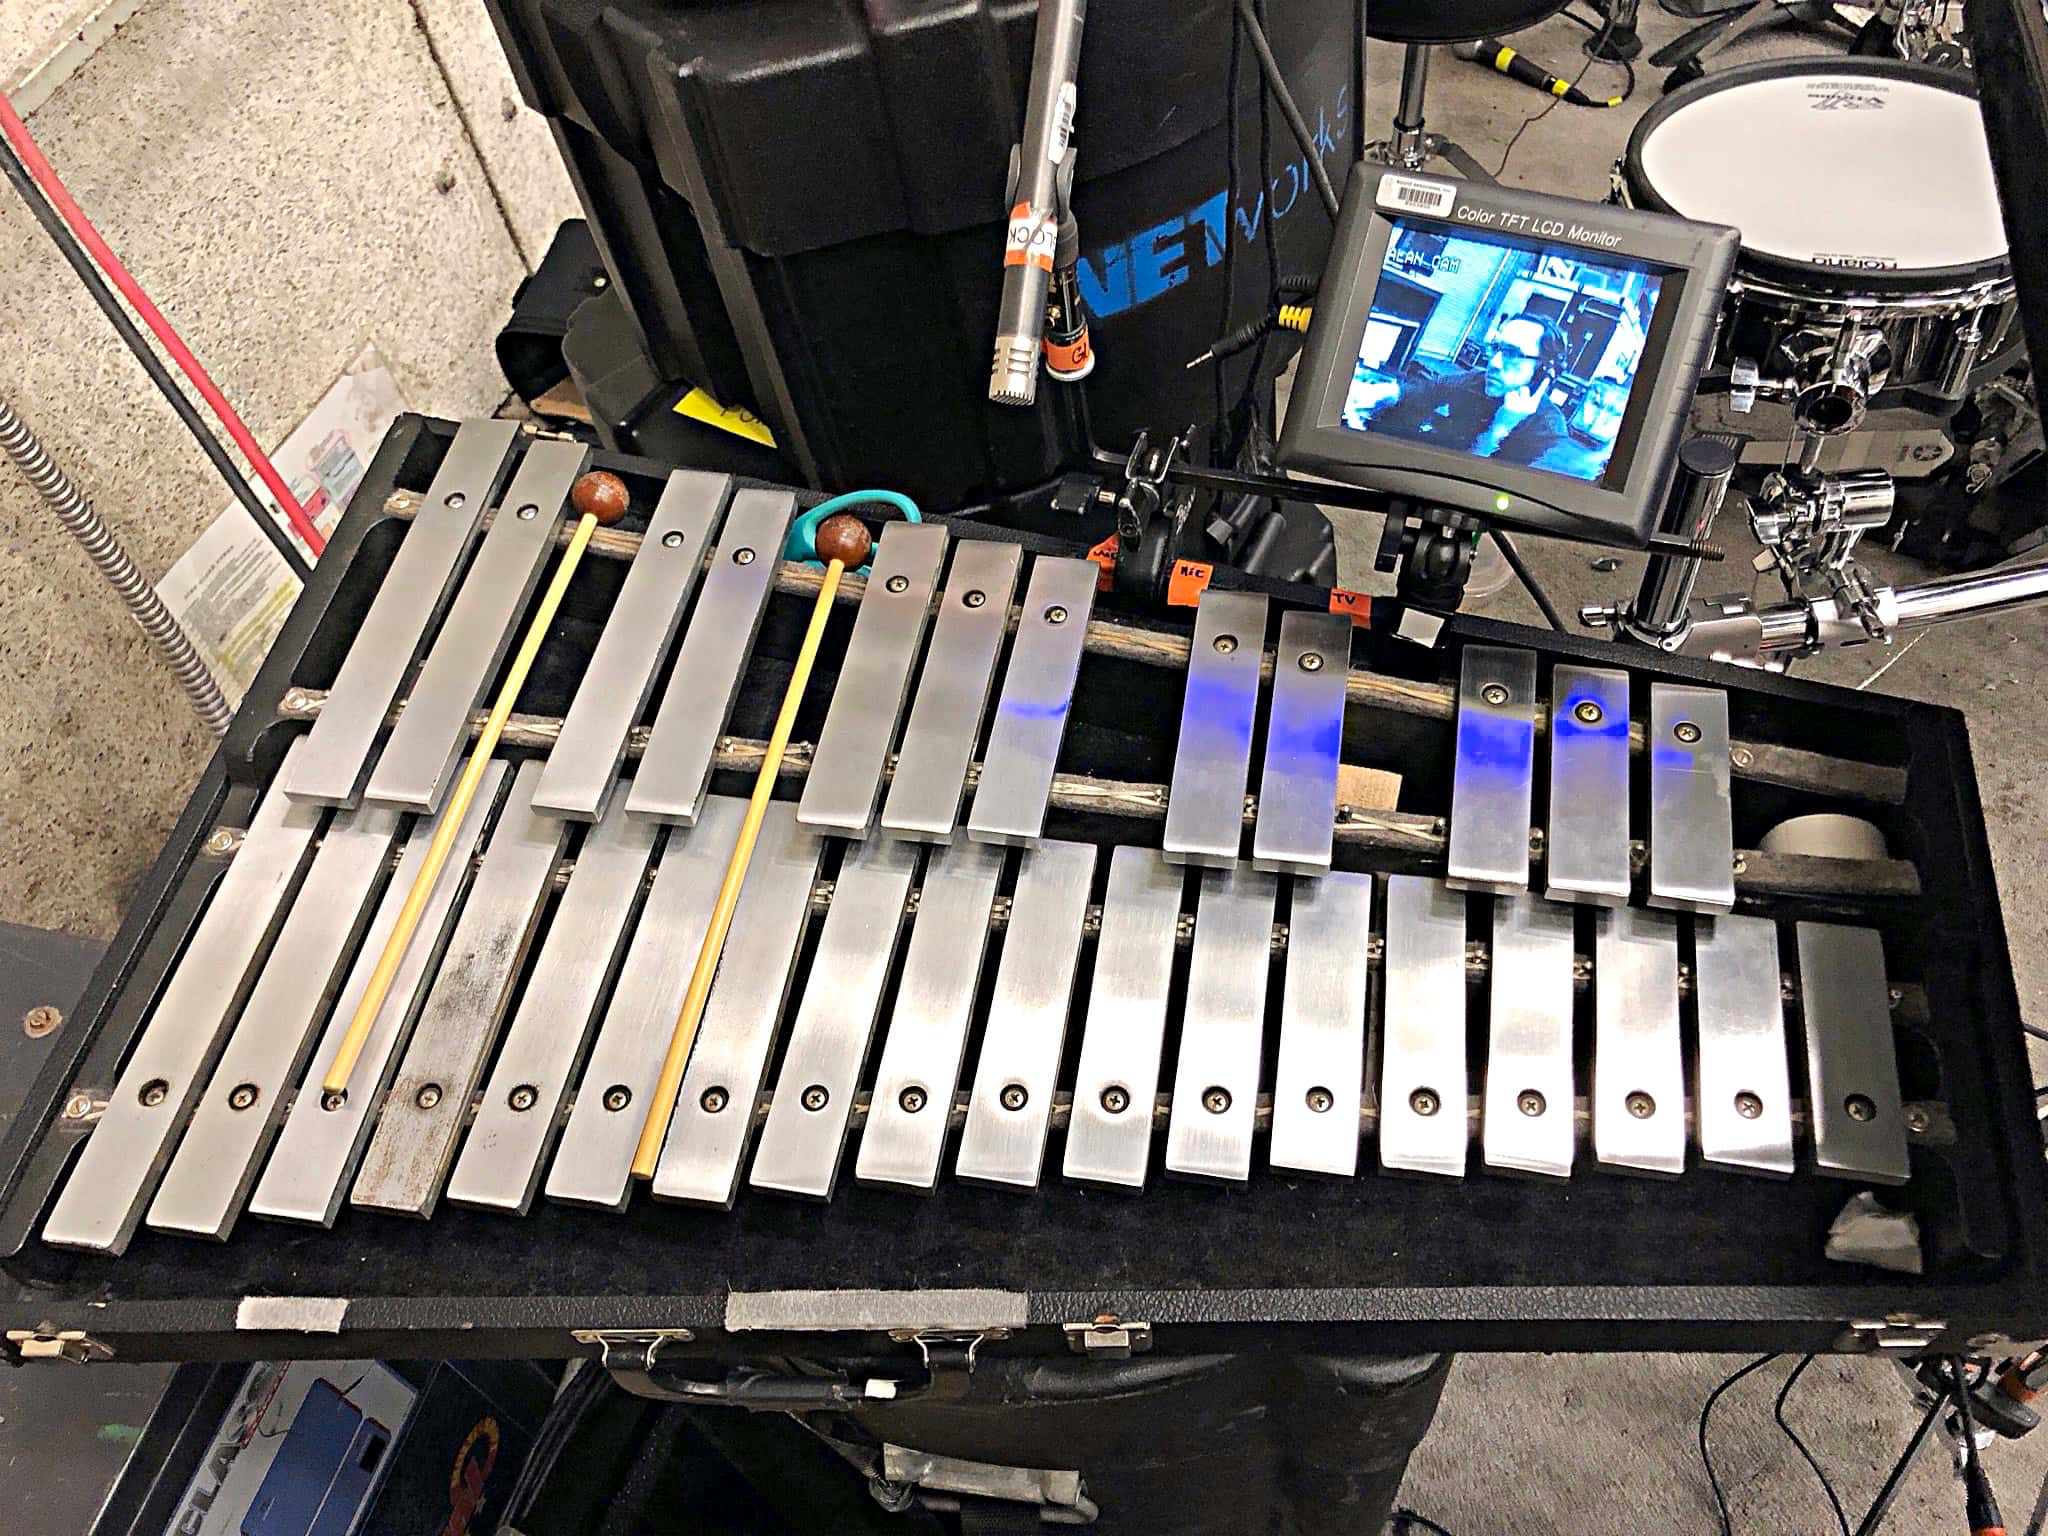 Ryan McCausland's percussion setup for the National Tour of Dirty Dancing at the Eisenhower Auditorium at Penn State in University Park, Pennsylvania.